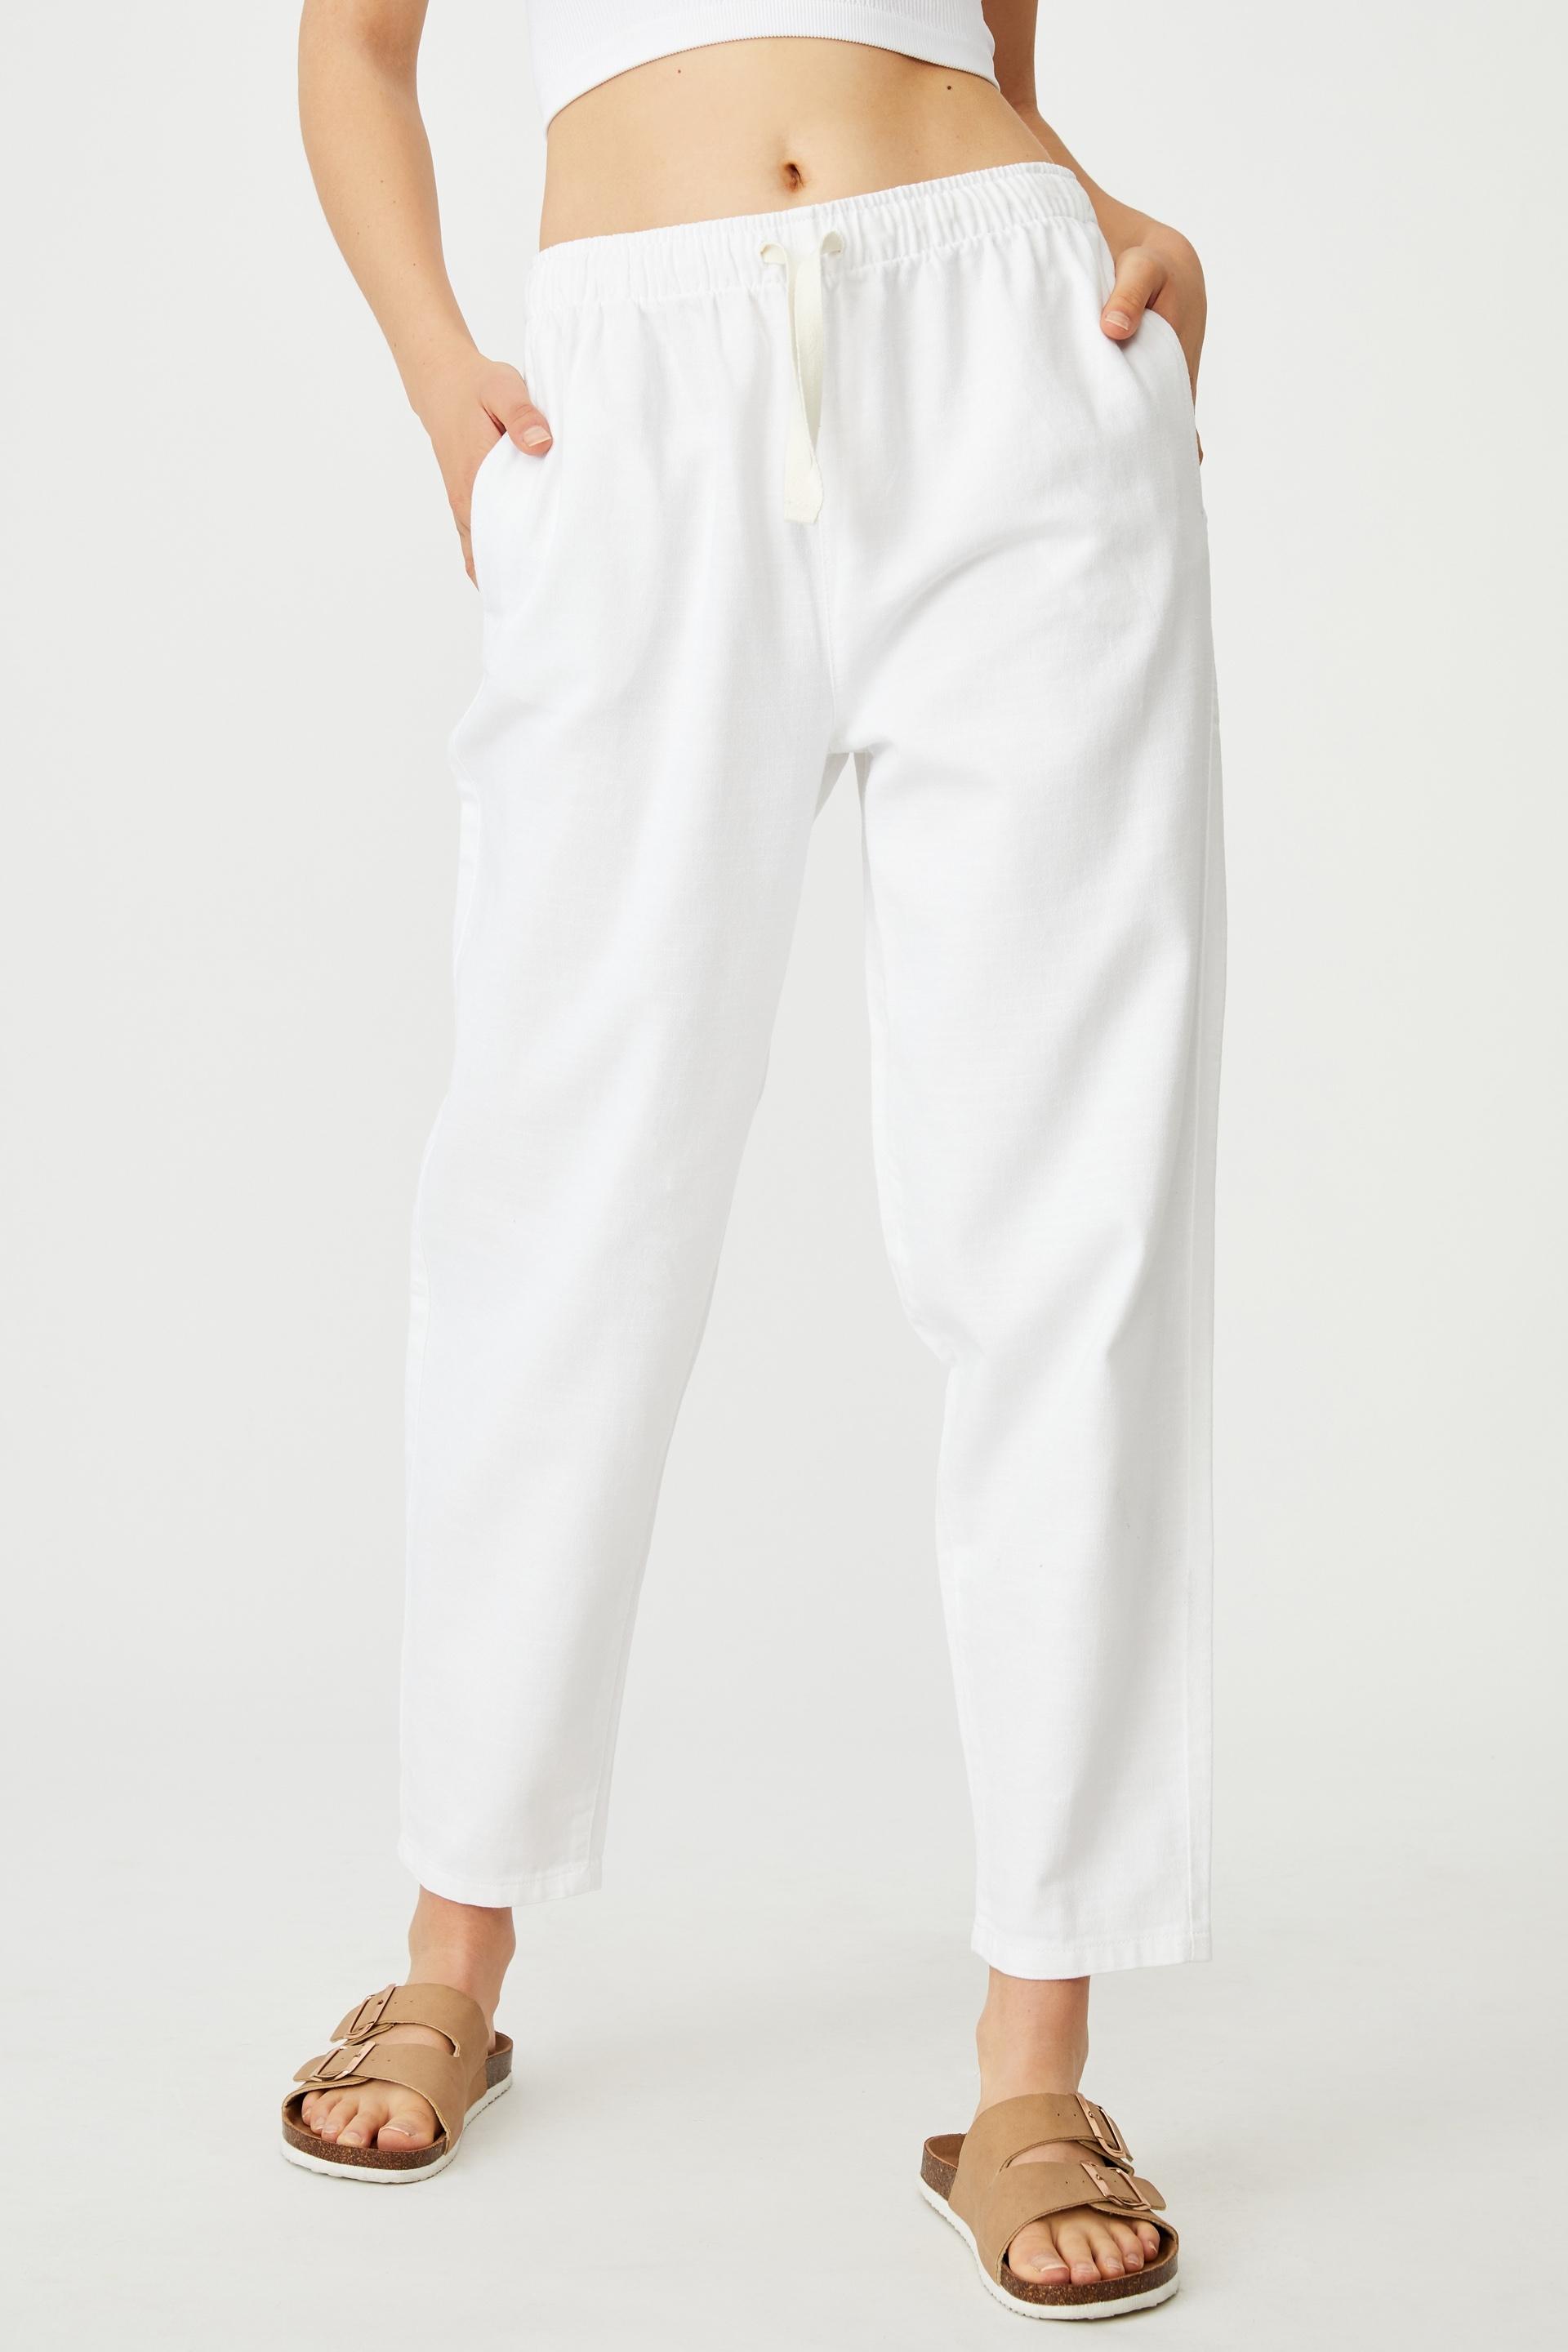 Everyday pant - chalk white Cotton On Trousers | Superbalist.com